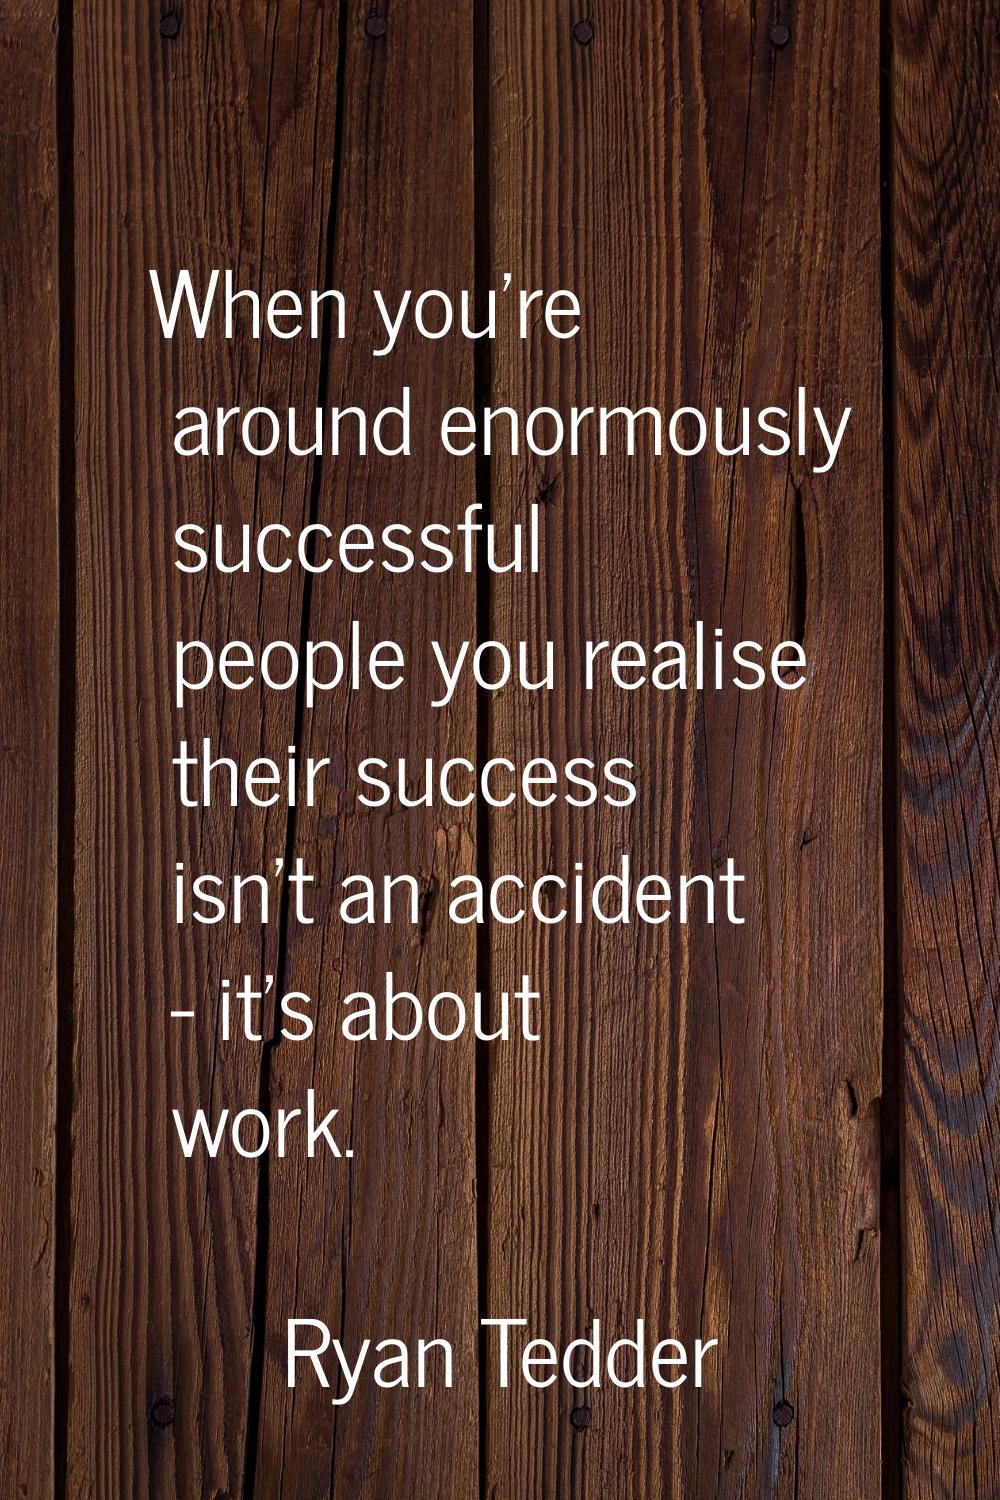 When you're around enormously successful people you realise their success isn't an accident - it's 